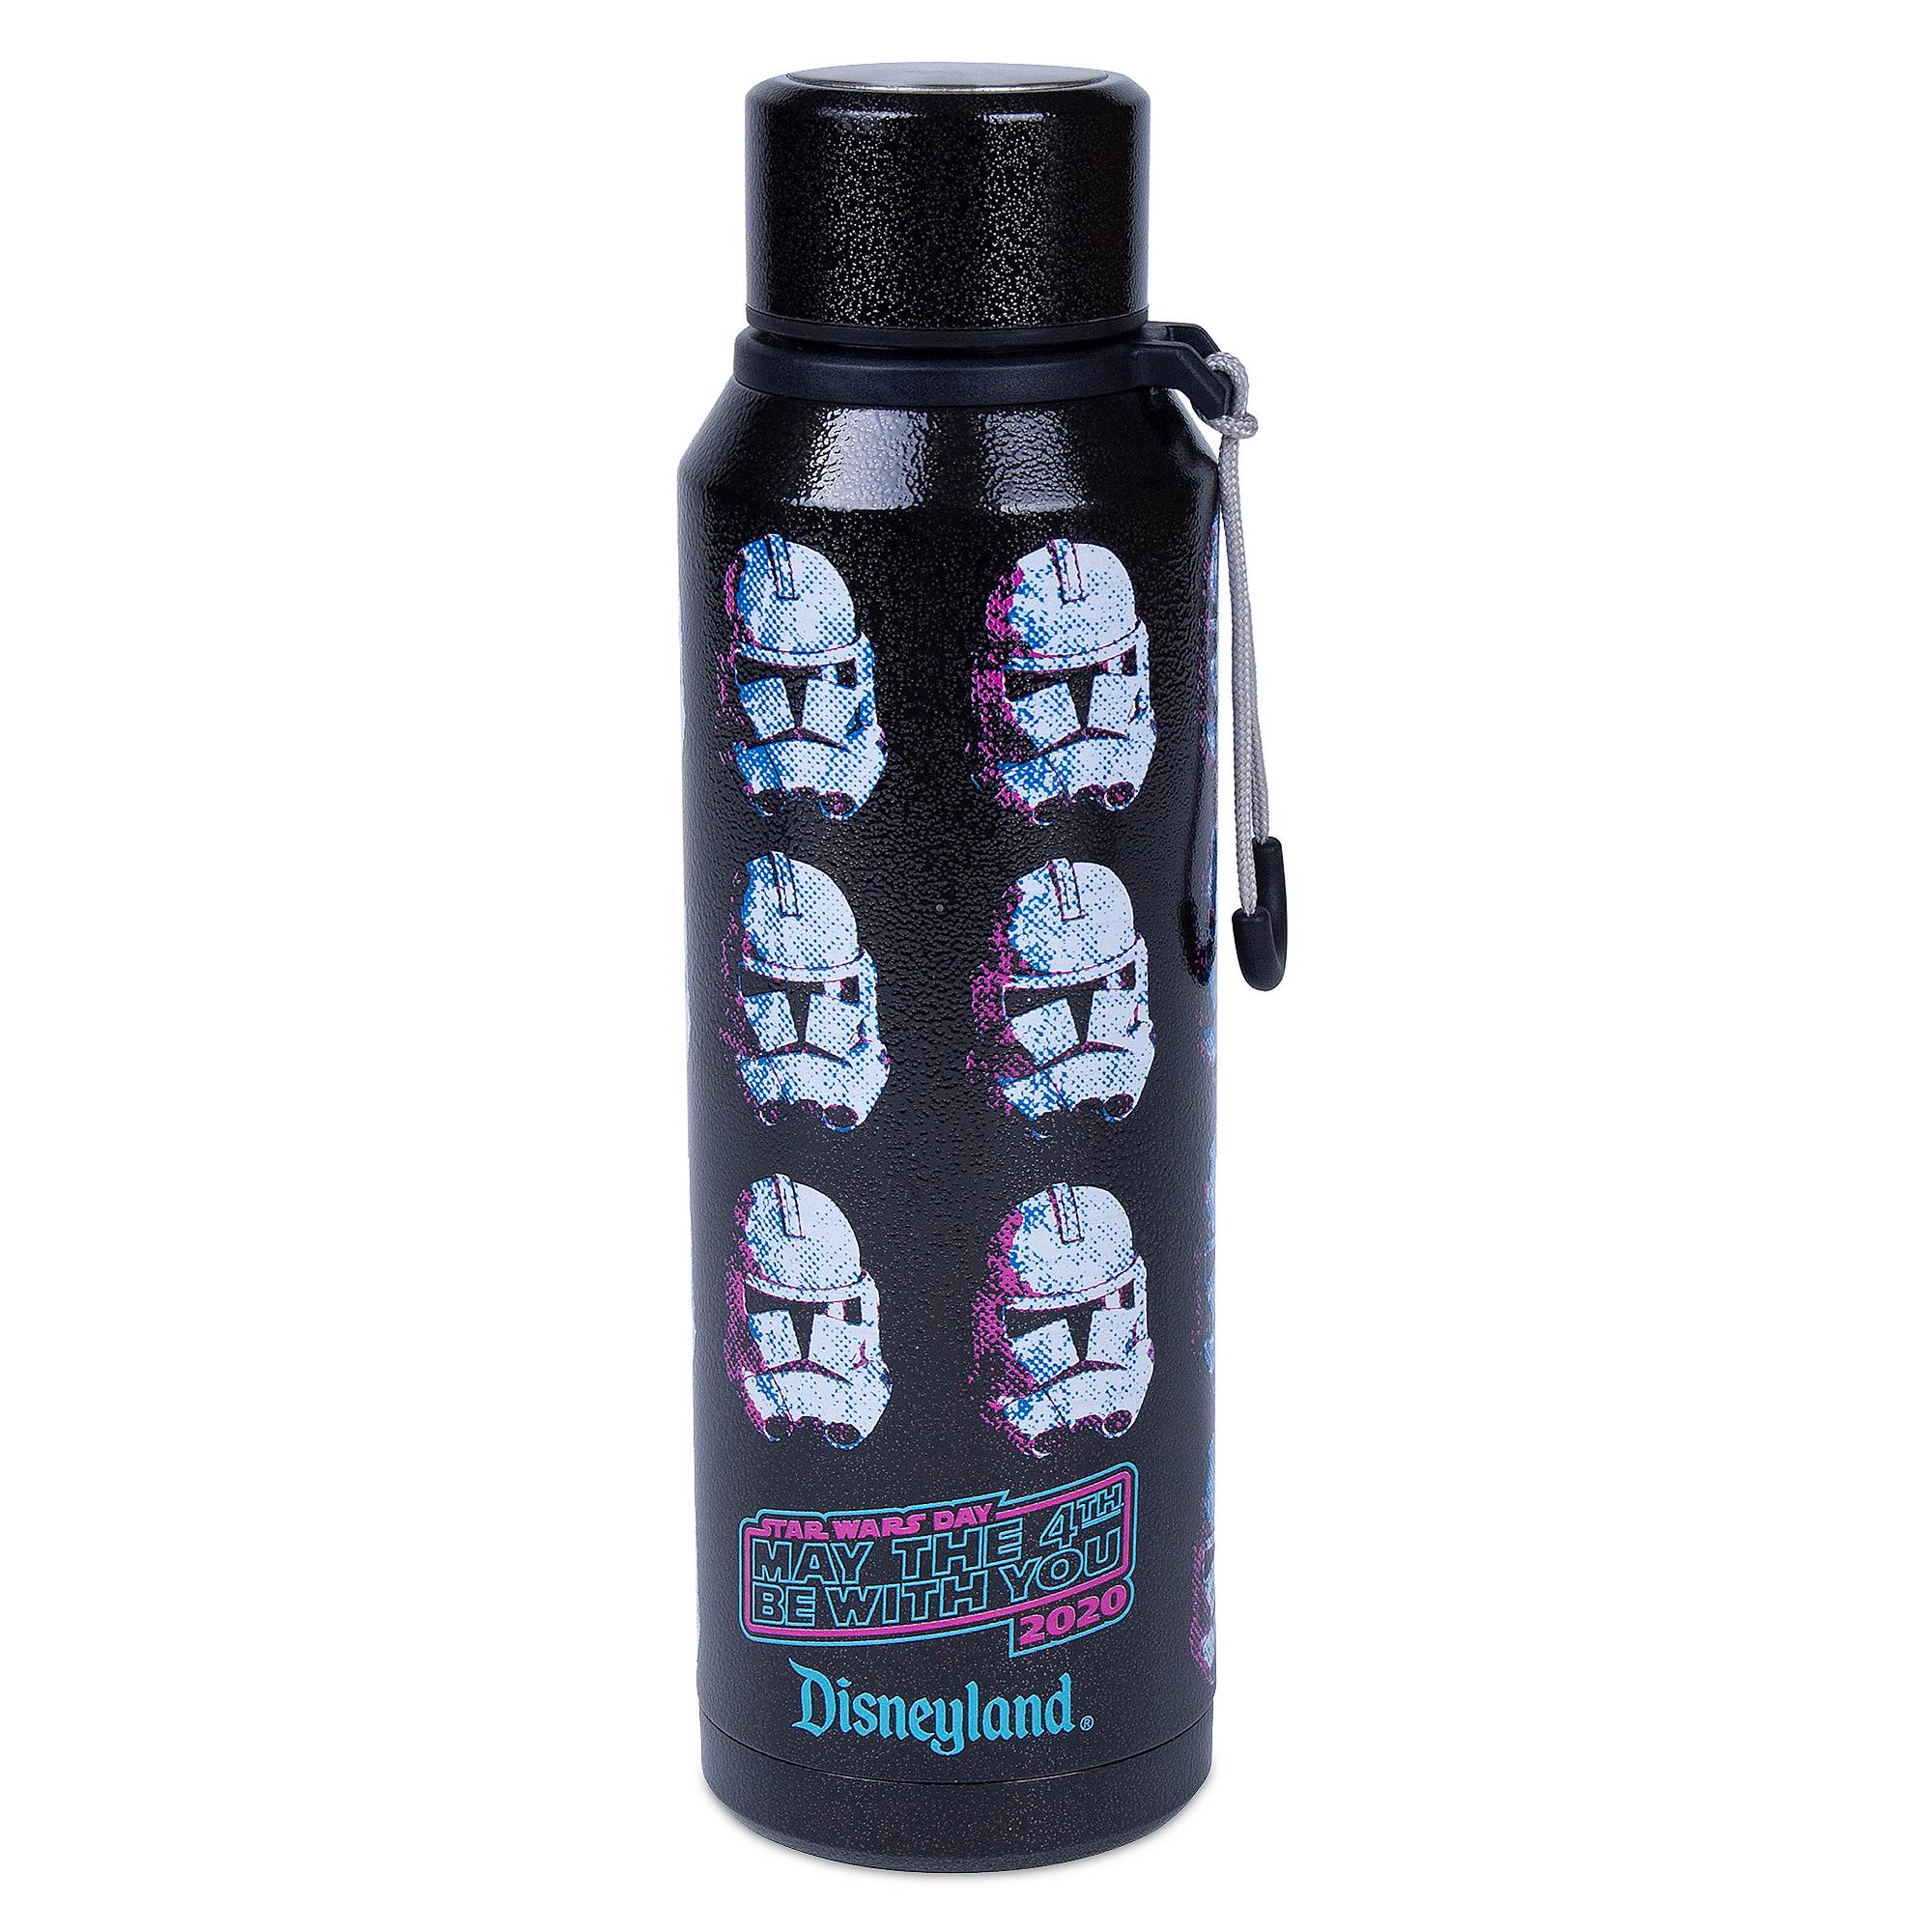 Disney Star Wars May the 4th Be With You Water Bottle Disneyland New – I  Love Characters